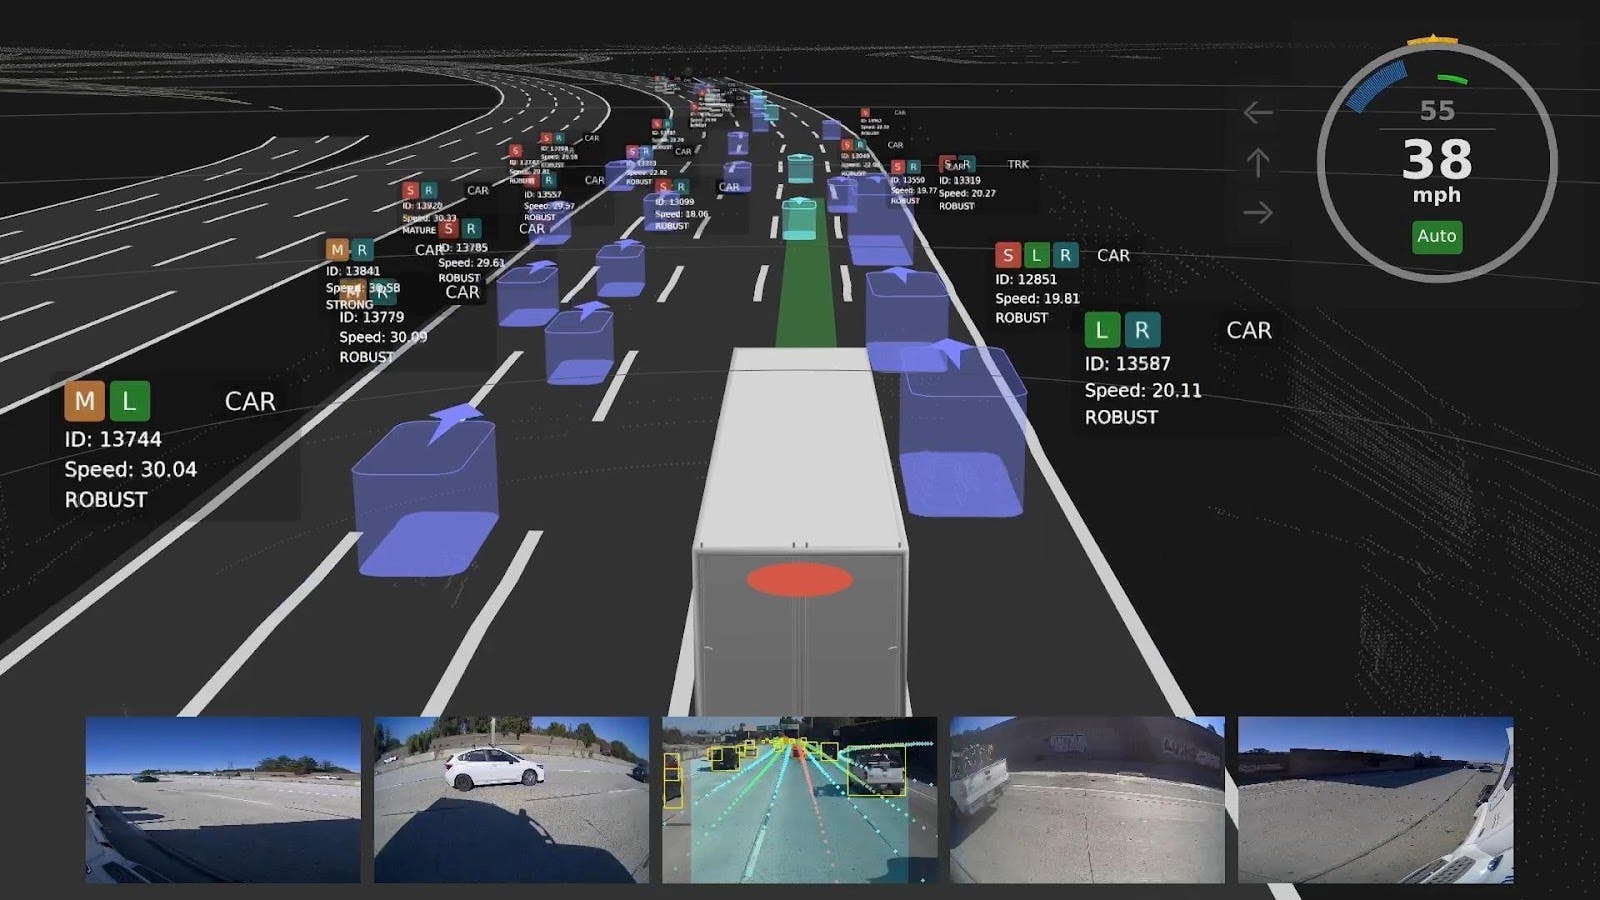 Visualization of truck on highway using PlusDrive on Autonomy OS